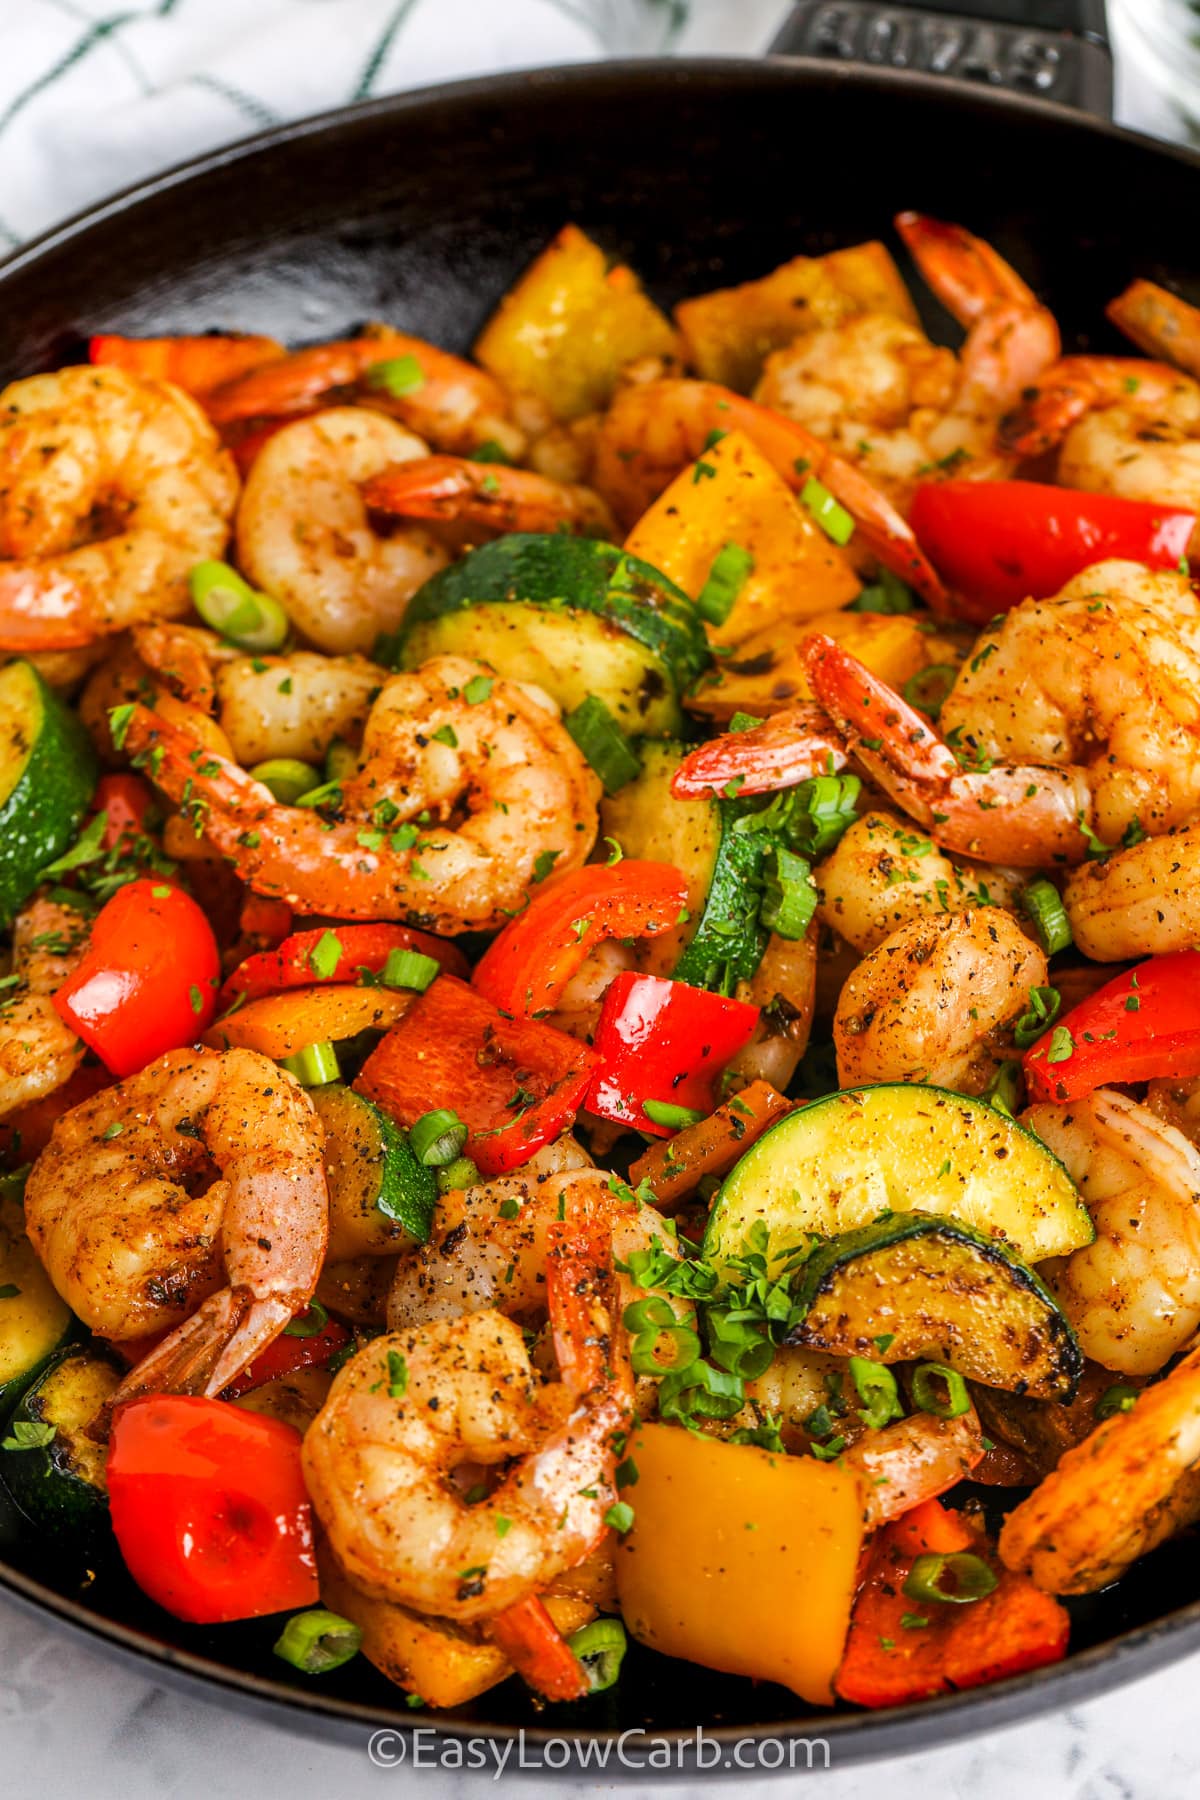 Easy Shrimp Vegetable Skillet in a frying pan with parsley and green onions as garnish